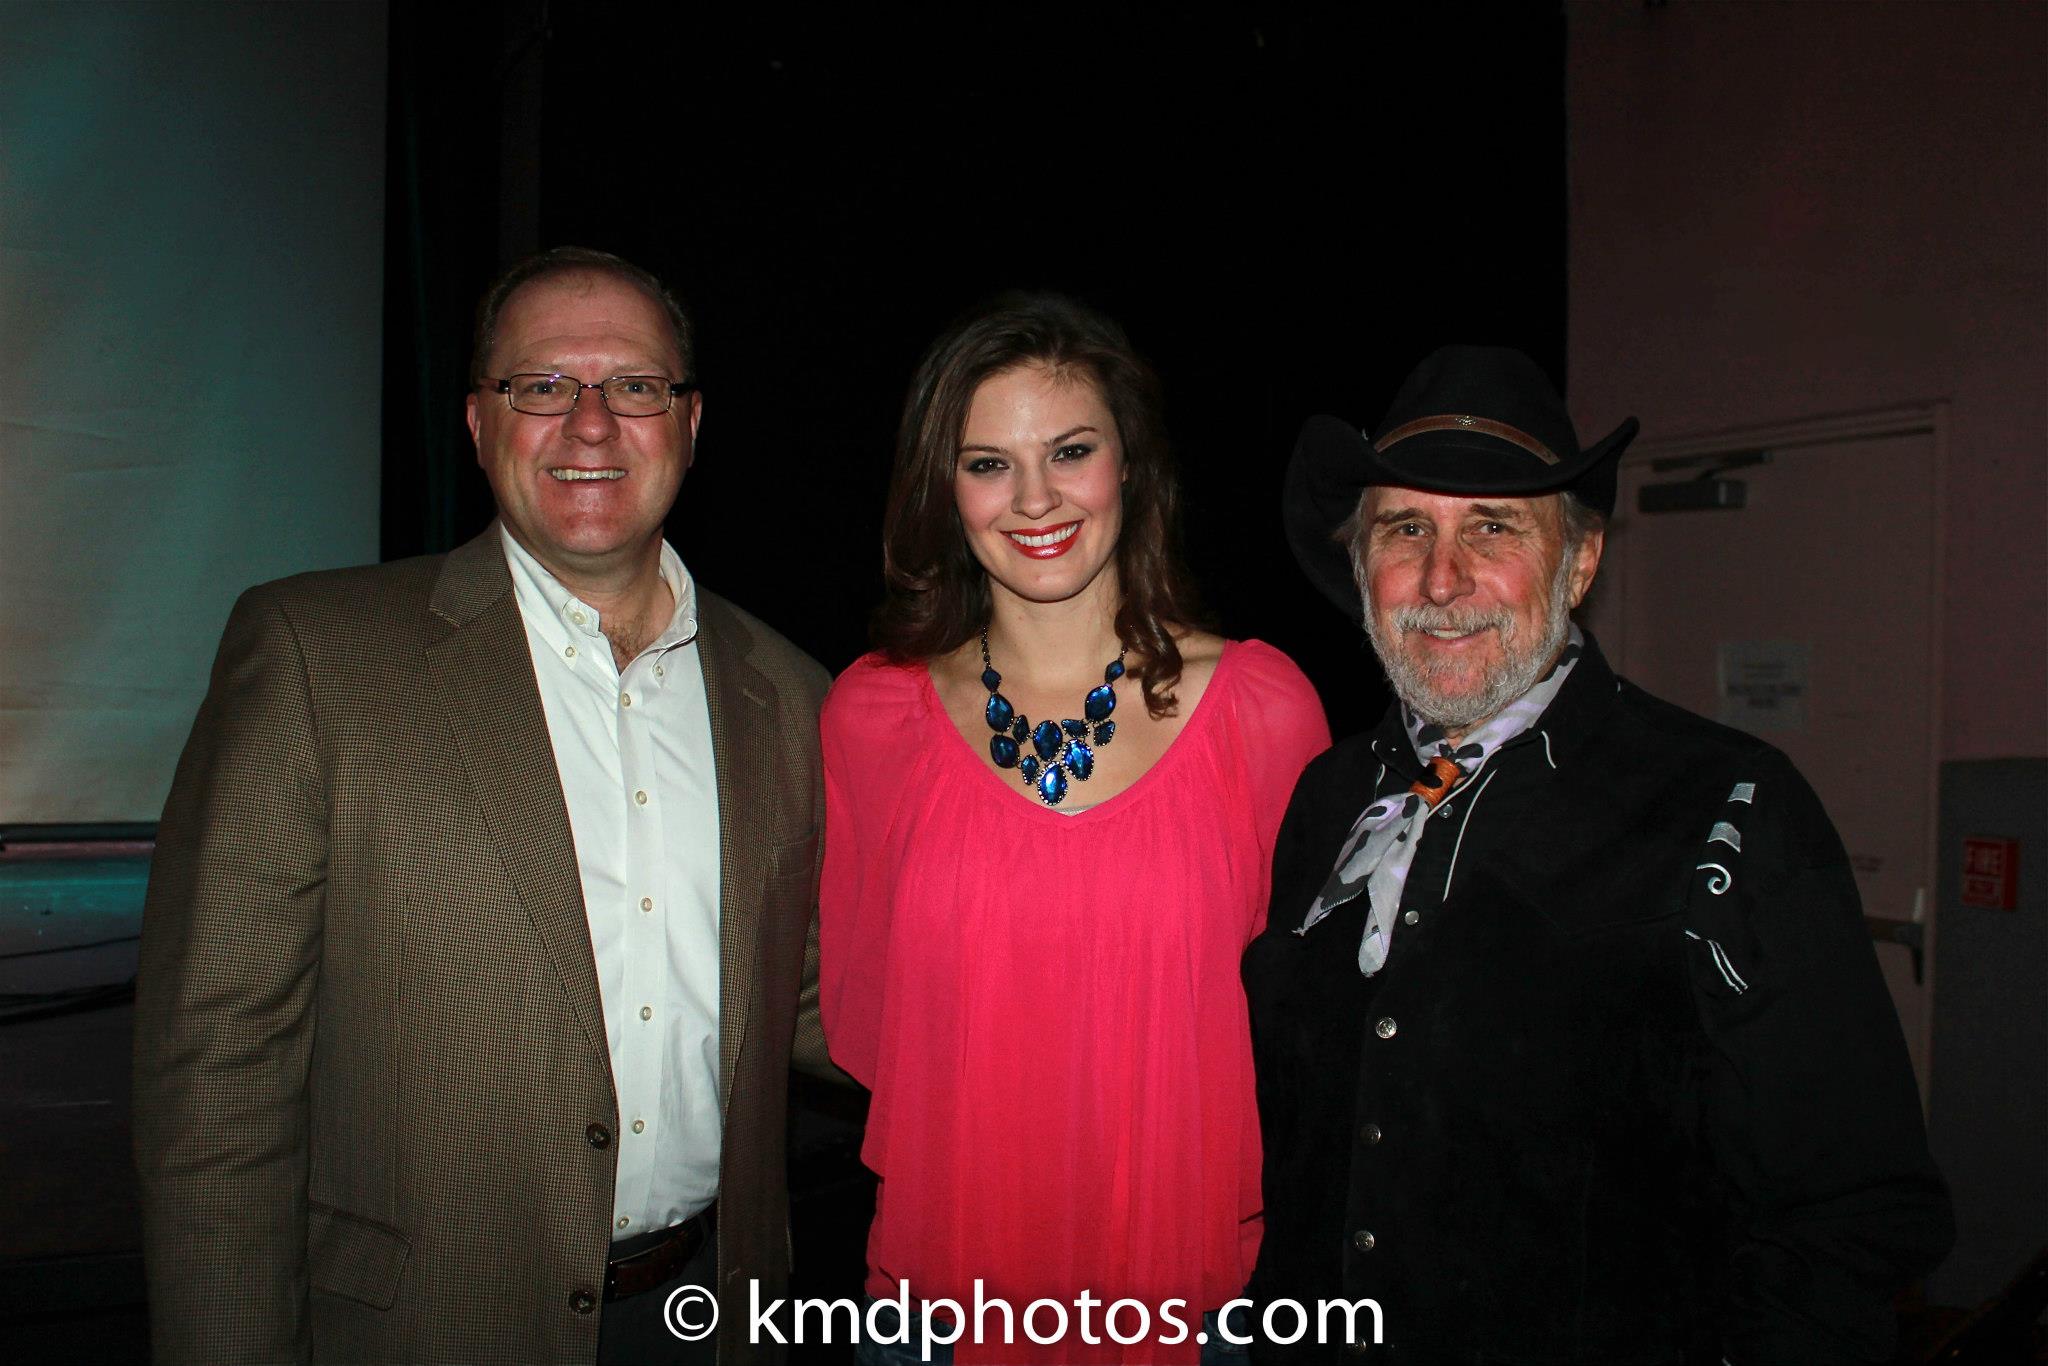 Mike Allison, Ayla Brown, and Bill Miller at the Premiere of Cowboy Spirit.